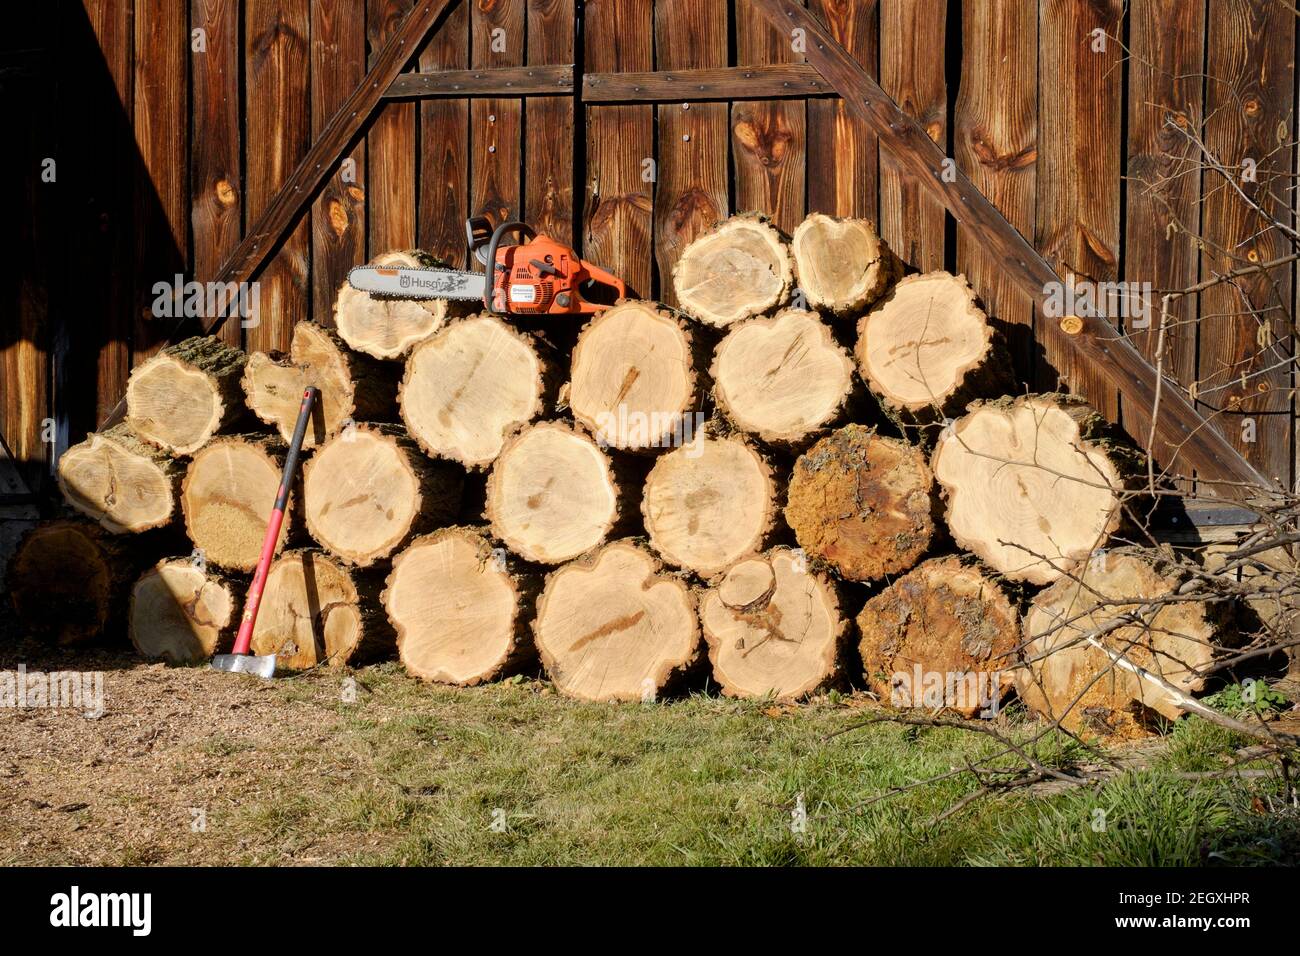 large stack of freshly cut tree rounds stacked against barn with husqvarna 445 chainsaw on top waiting for splitting with axe zala county hungary Stock Photo